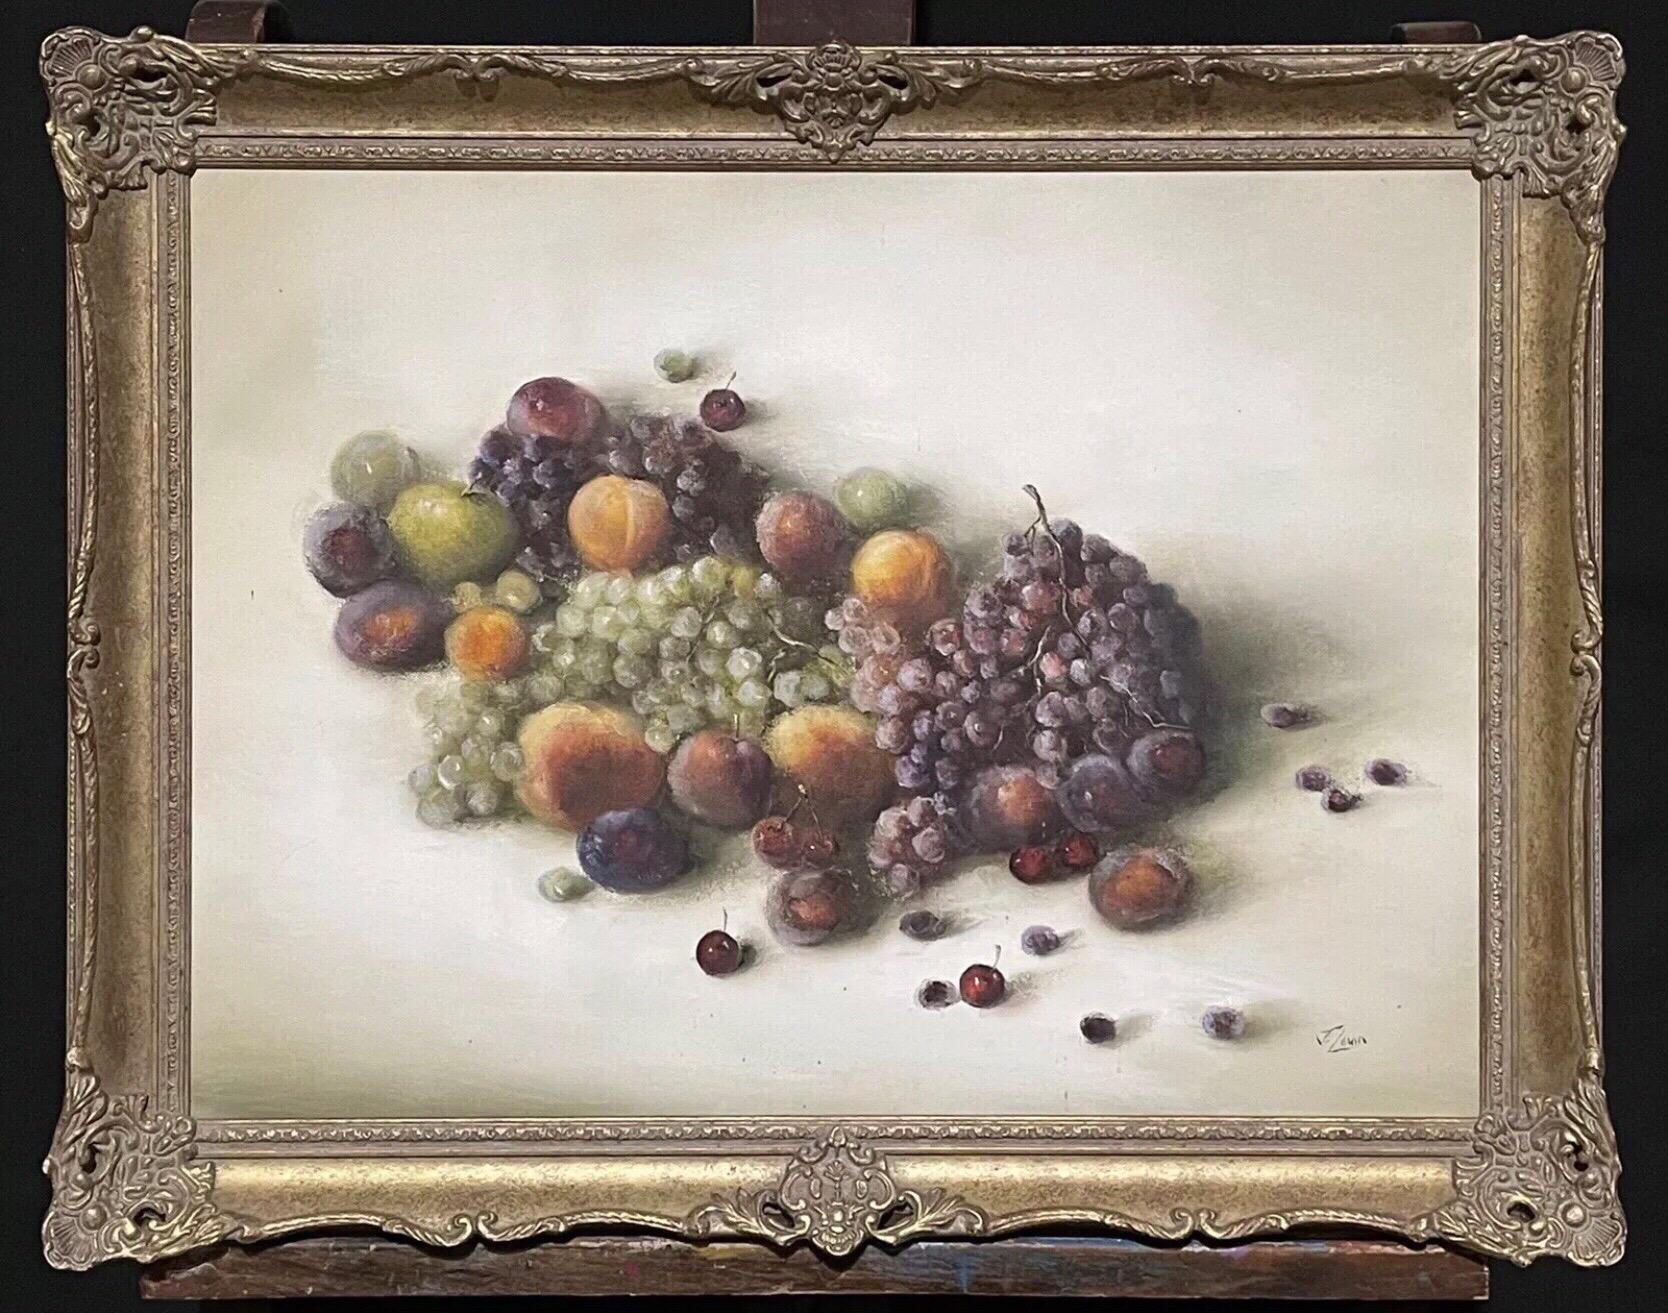 J. Lewin Interior Painting - Large Signed Oil Still Life Fruit - Opulent display grapes peaches cherries